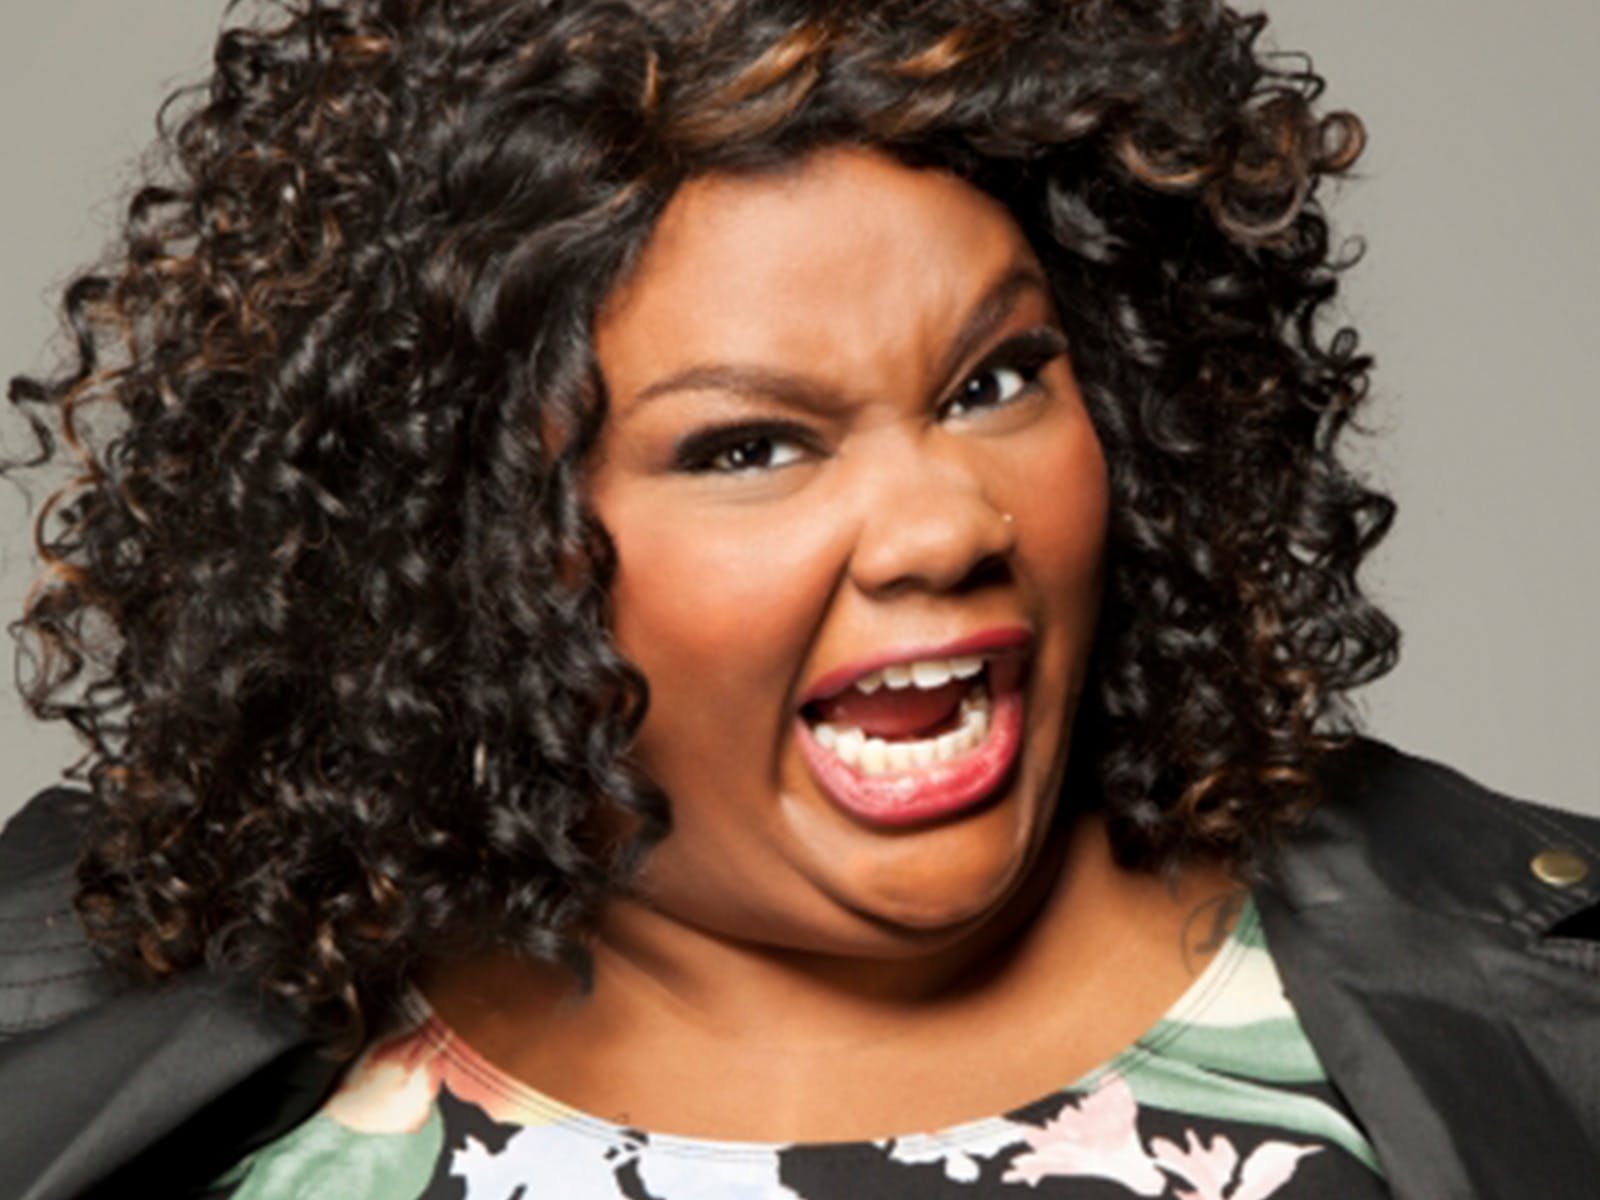 Nicole Byer at Drafthouse Comedy in DC Tickets. Washington DC